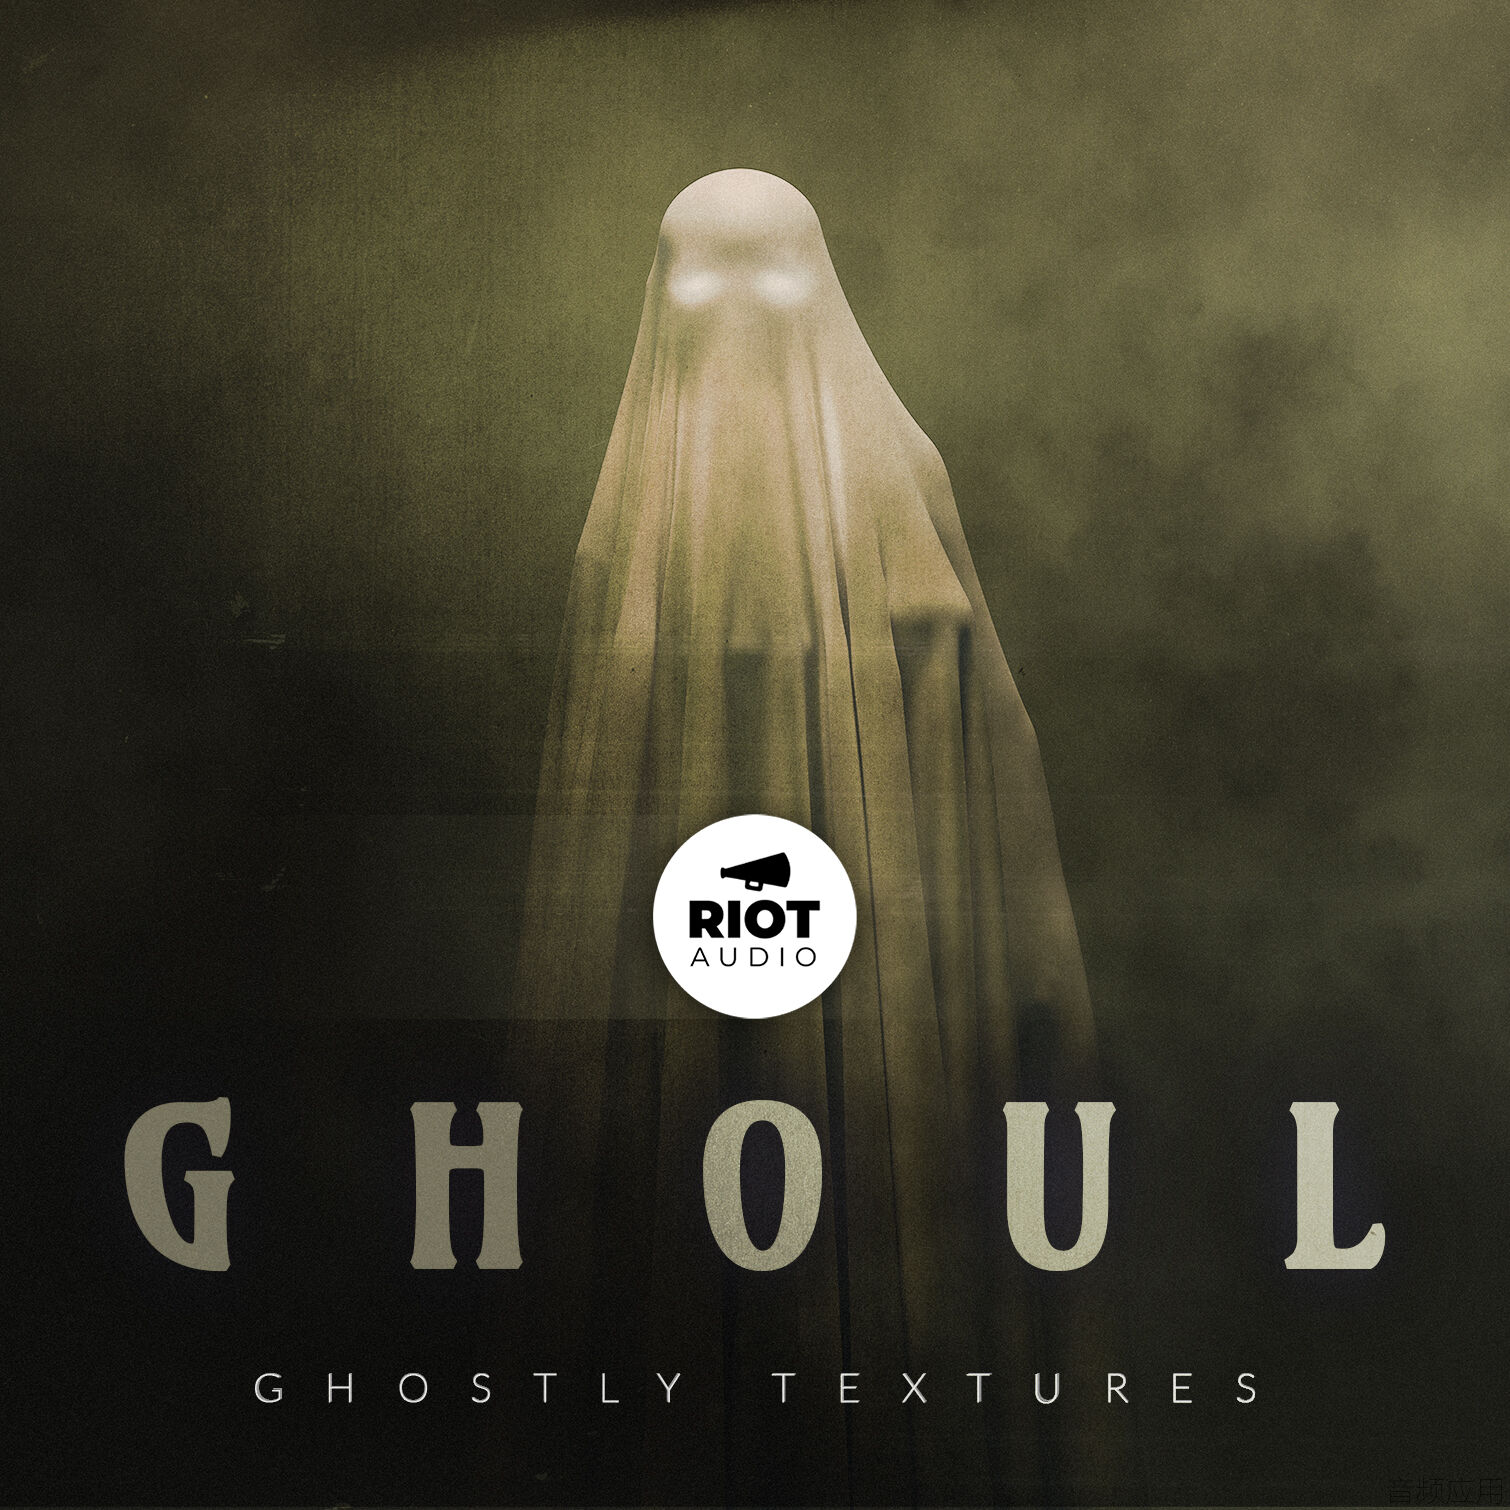 1041140d1667573736-riot-audio-releases-ghoul-ghoul-_-ghostly-textures-square.jpg